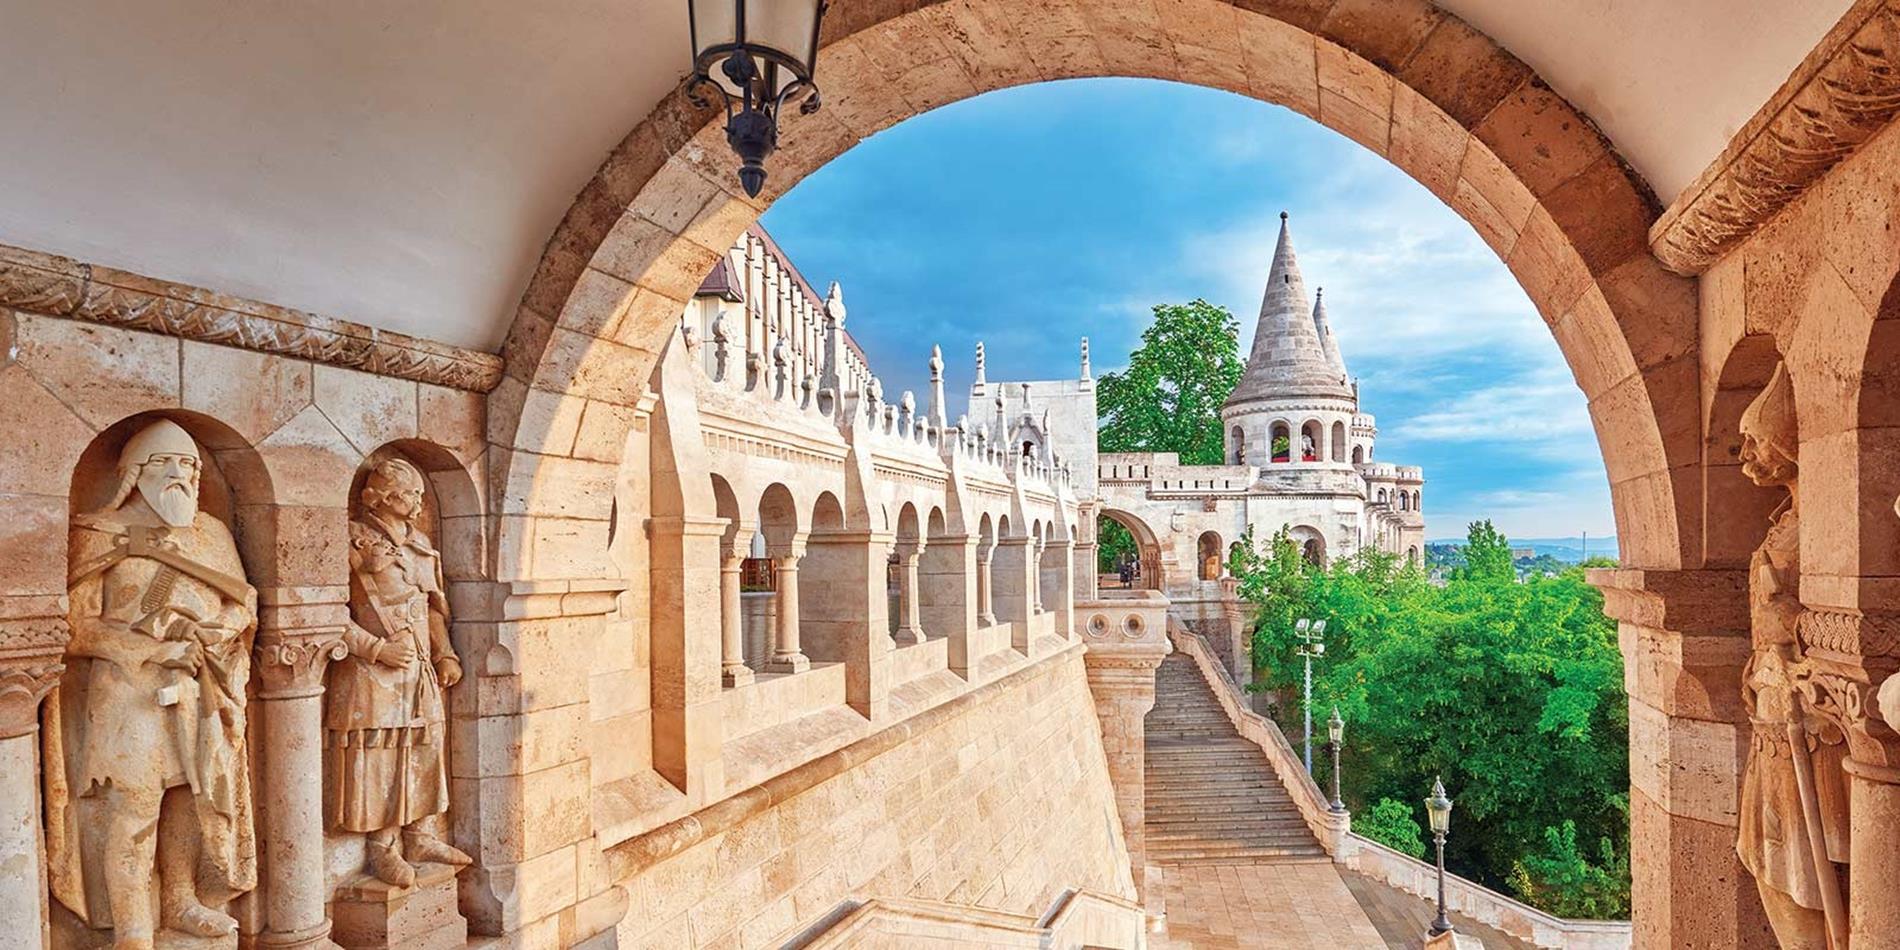 View of fisherman's bastion through archway with blue sky